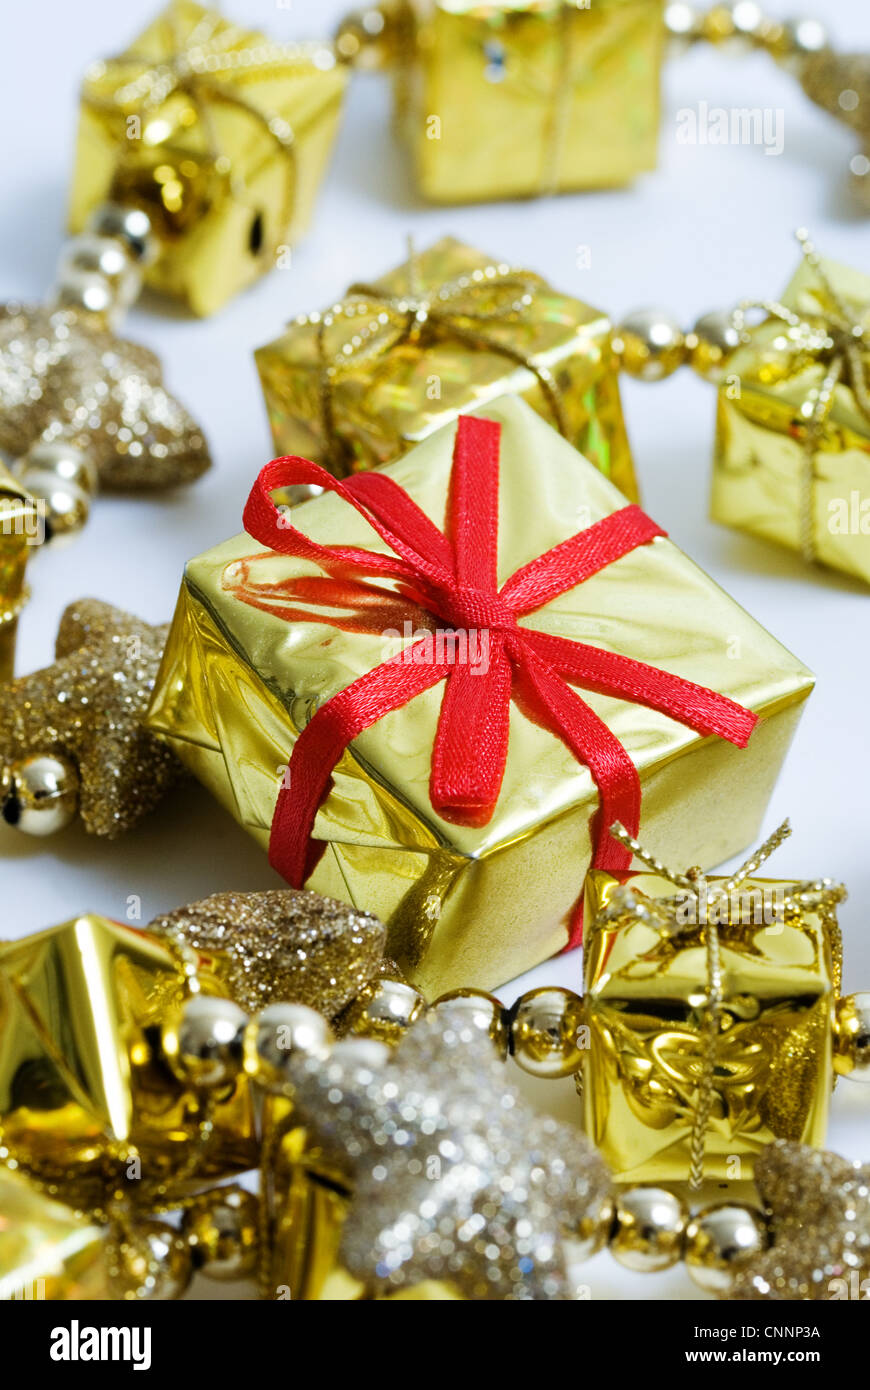 A Christmas tree ornament, string of gifts, Xmas theme Stock Photo